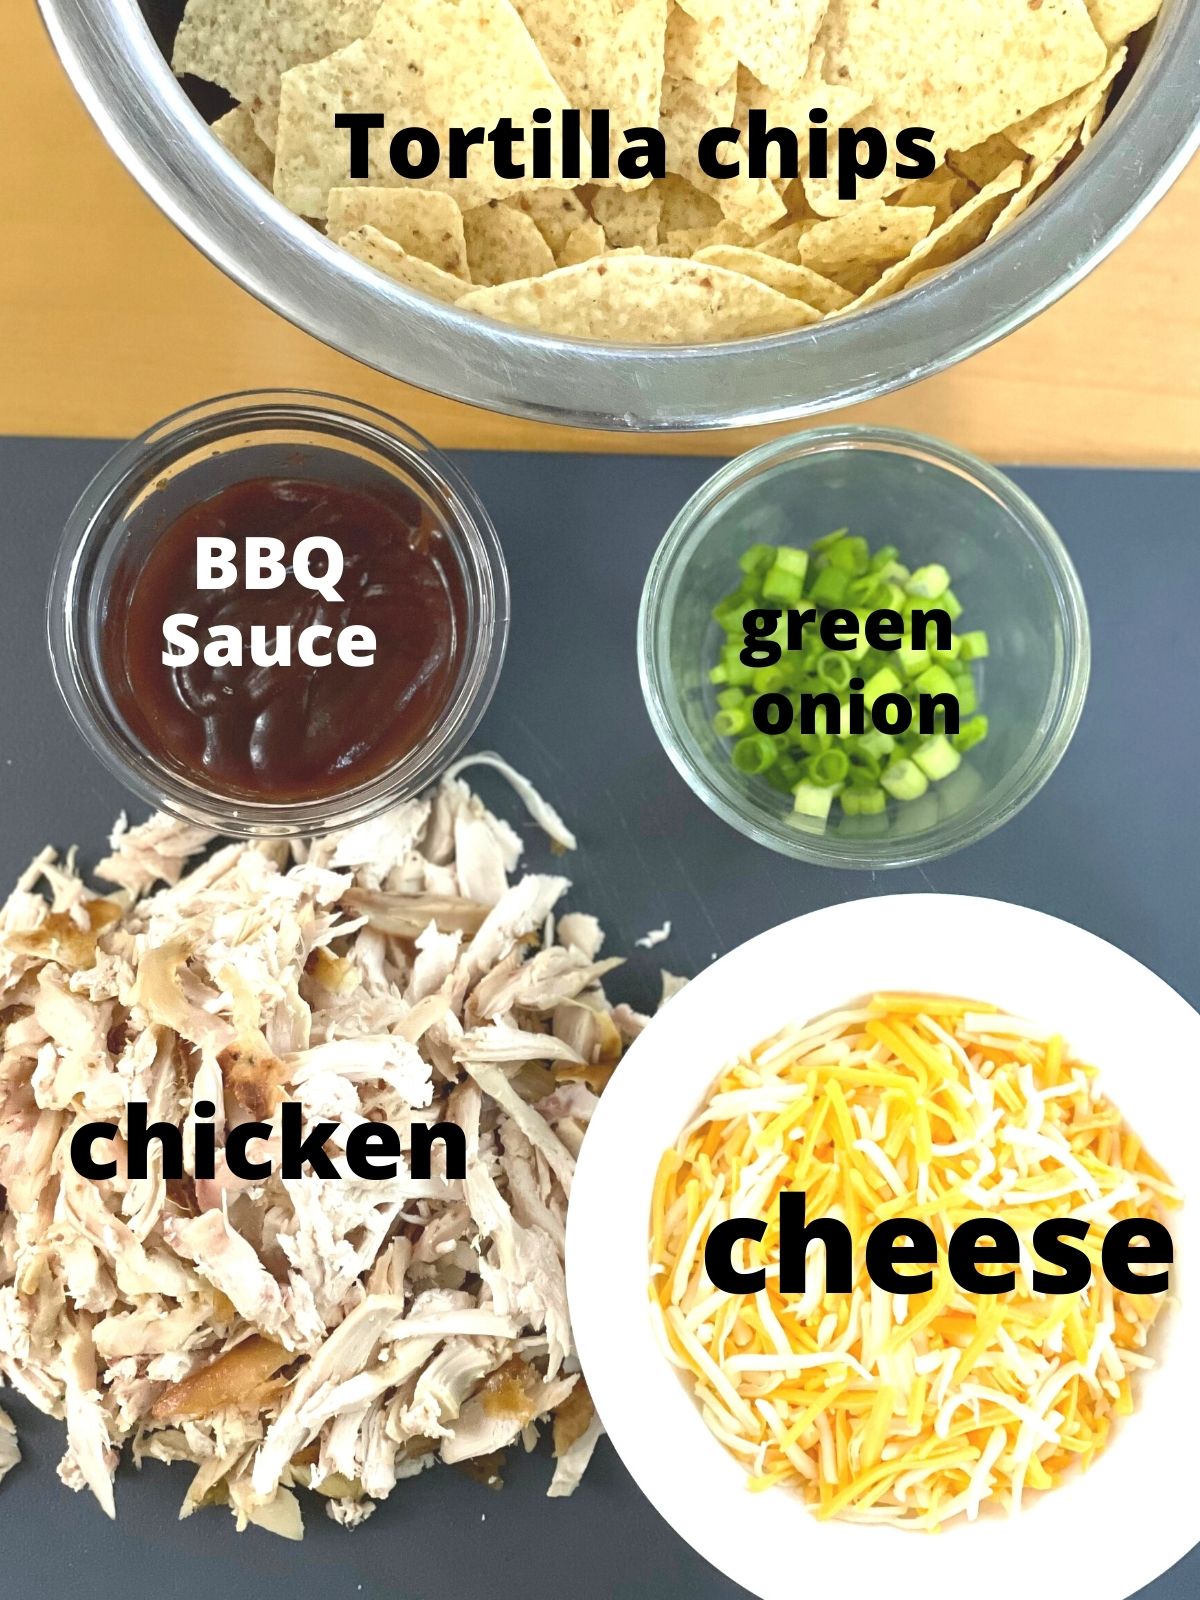 a bowl of tortilla chips surrounded by smaller bowls of nacho toppings as well as shredded chicken on a cutting board.